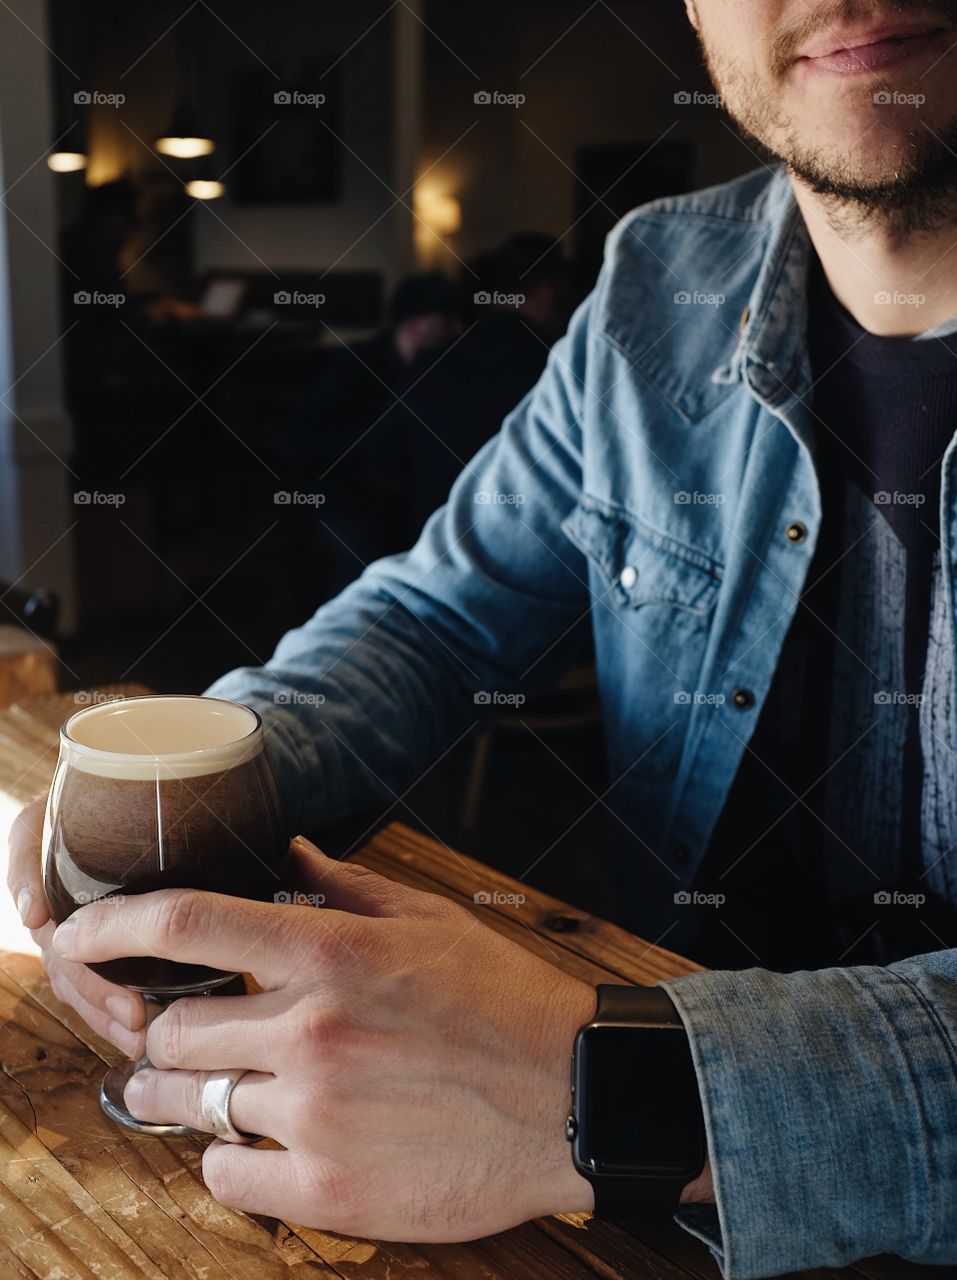 A married man sitting in a window enjoying a nitro cold brew coffee. He is wearing an Apple Watch, a Jean jacket, and a wedding ring on his finger.  